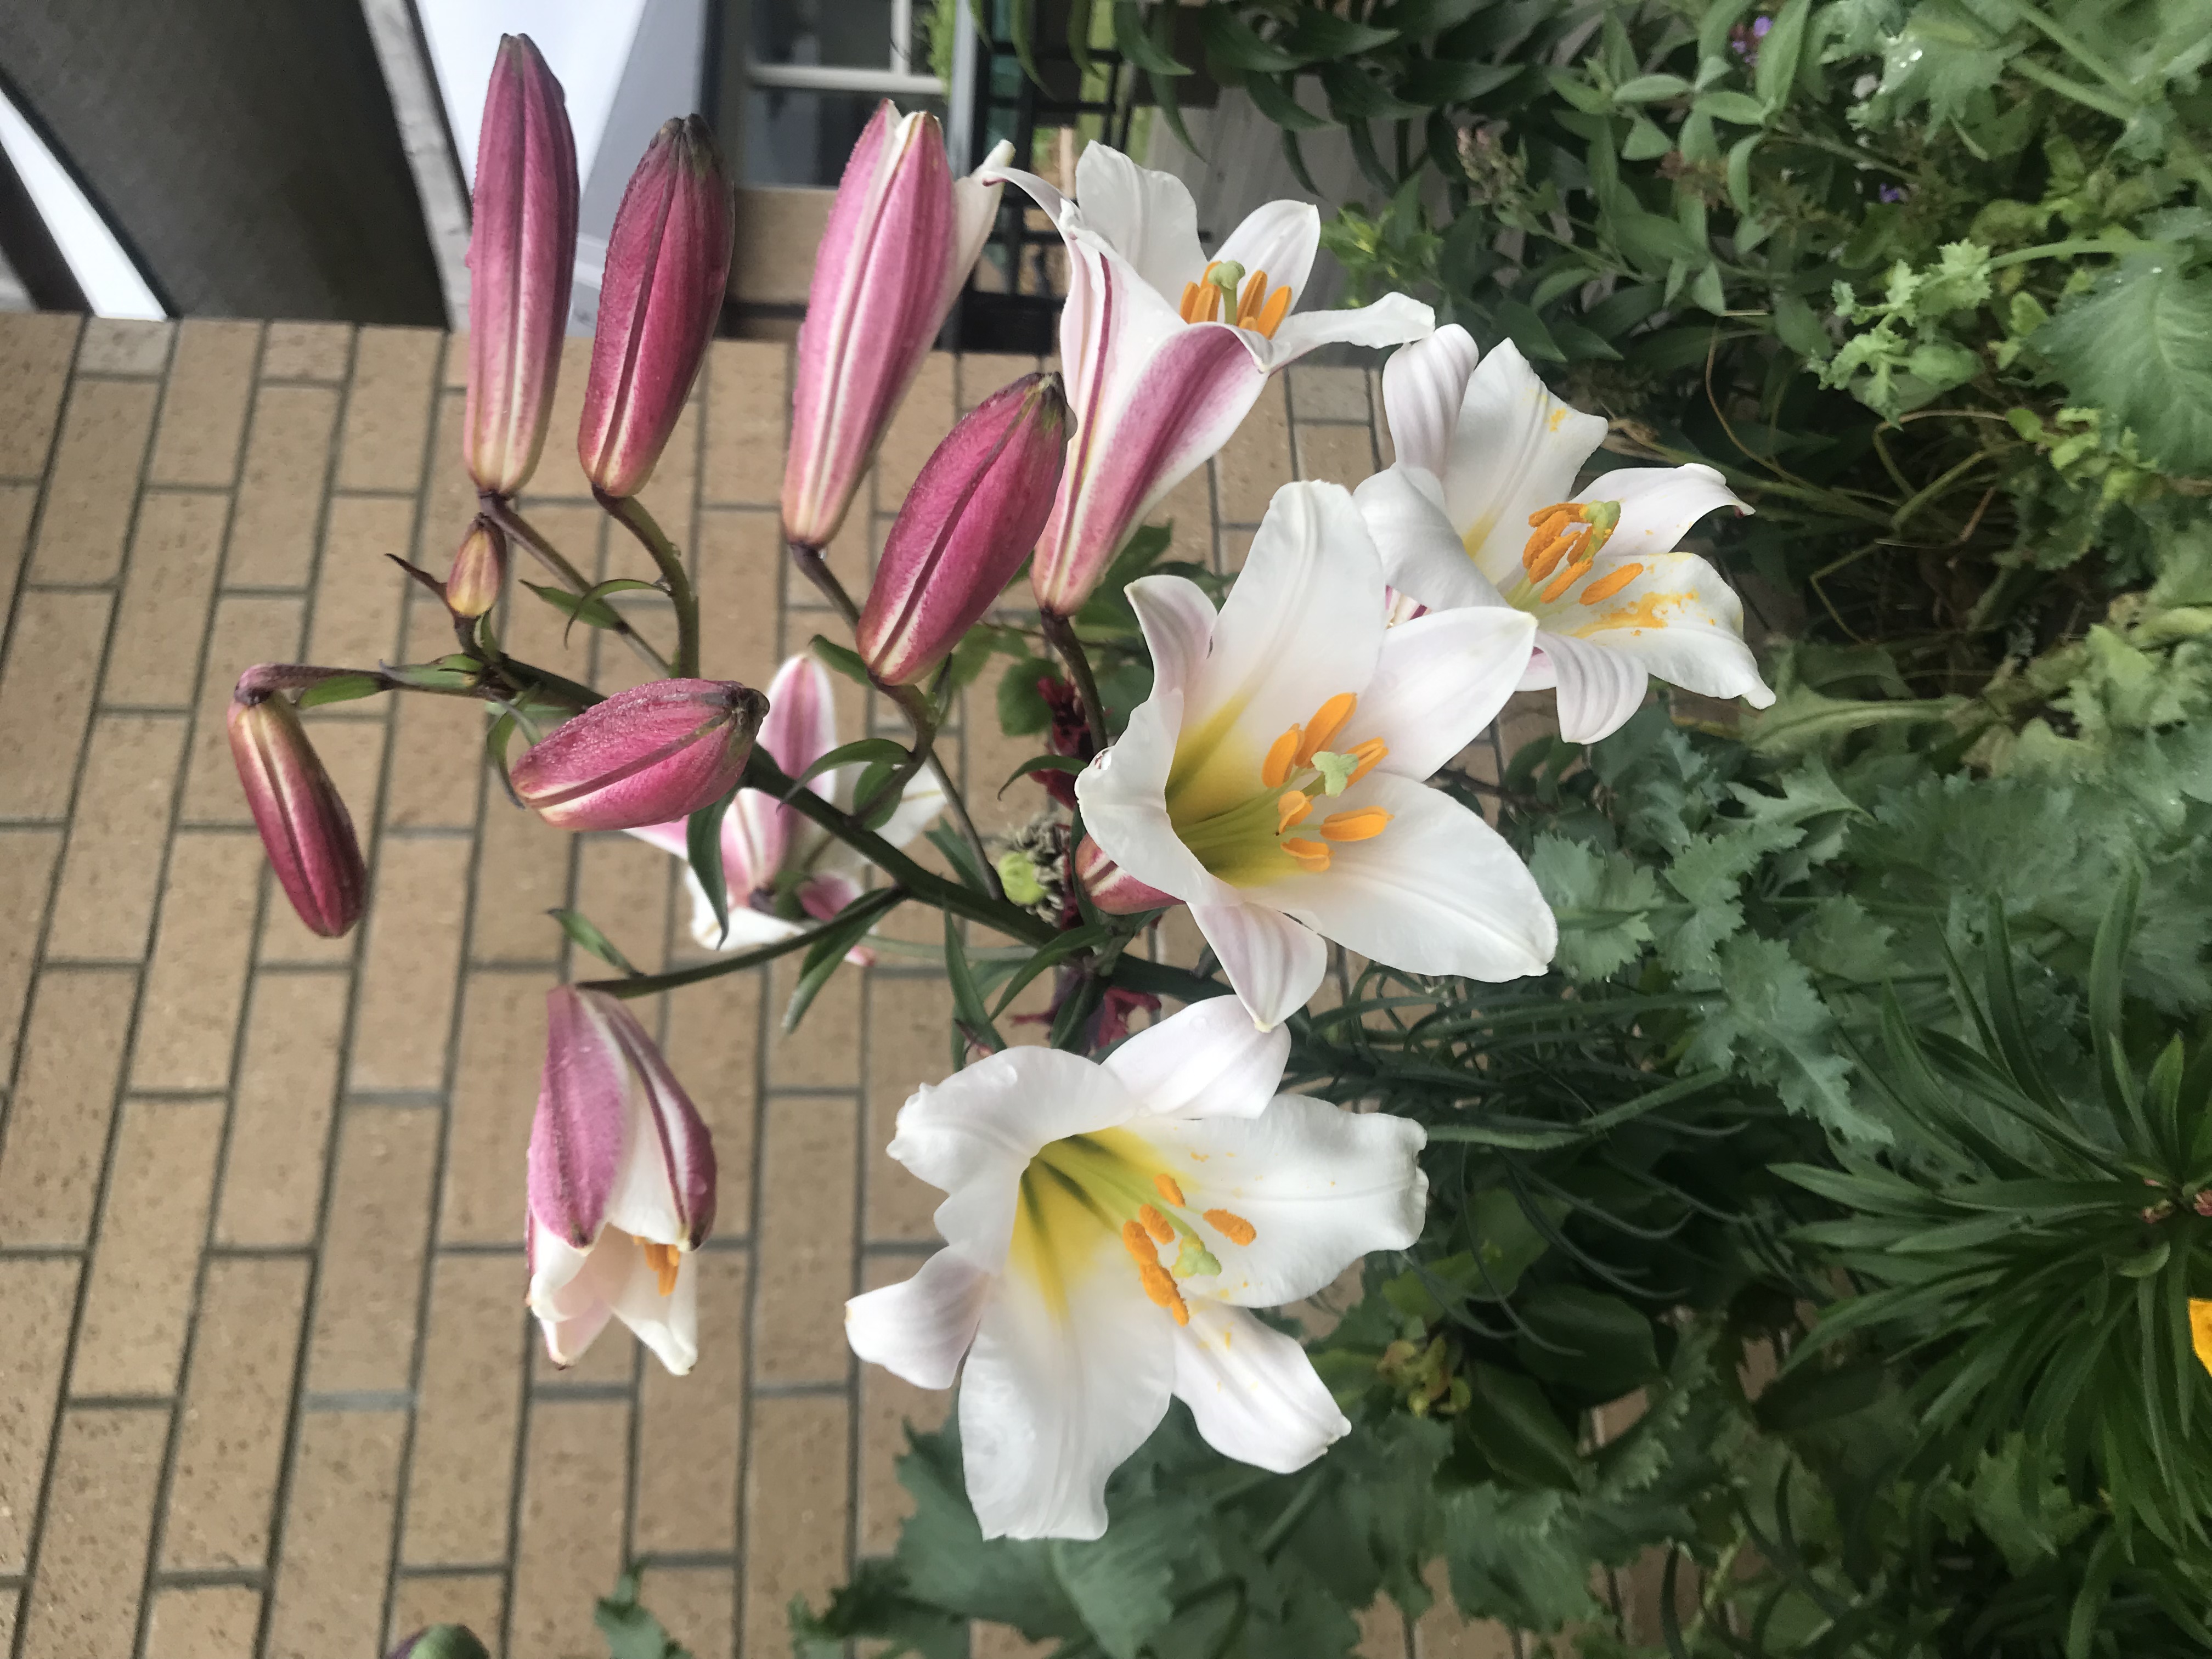 Lilies are blooming in time for Christmas 